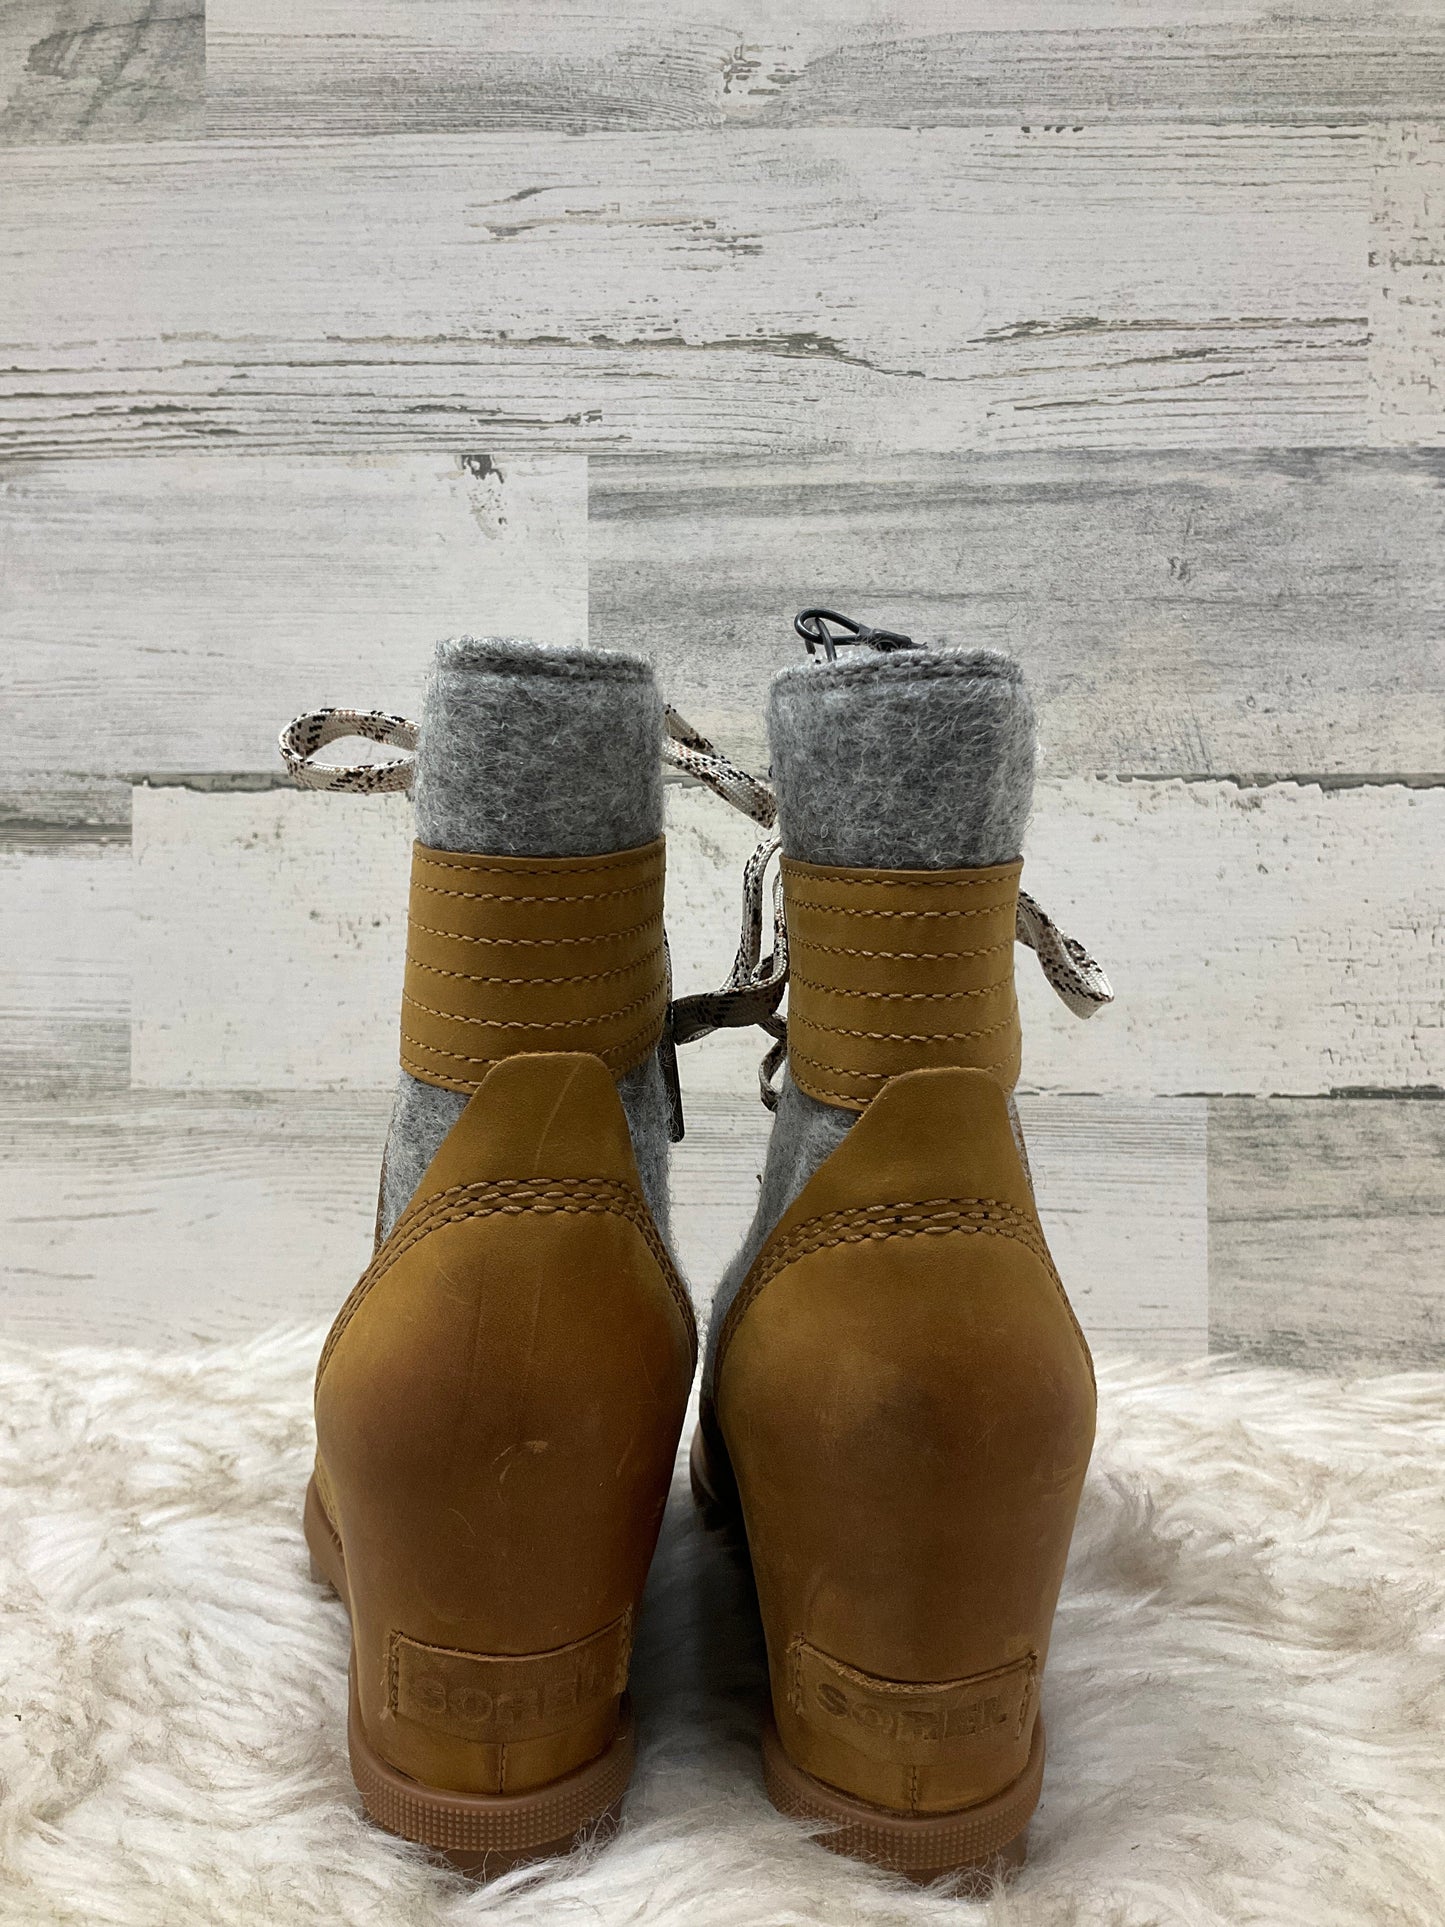 Boots Ankle Heels By Sorel  Size: 6